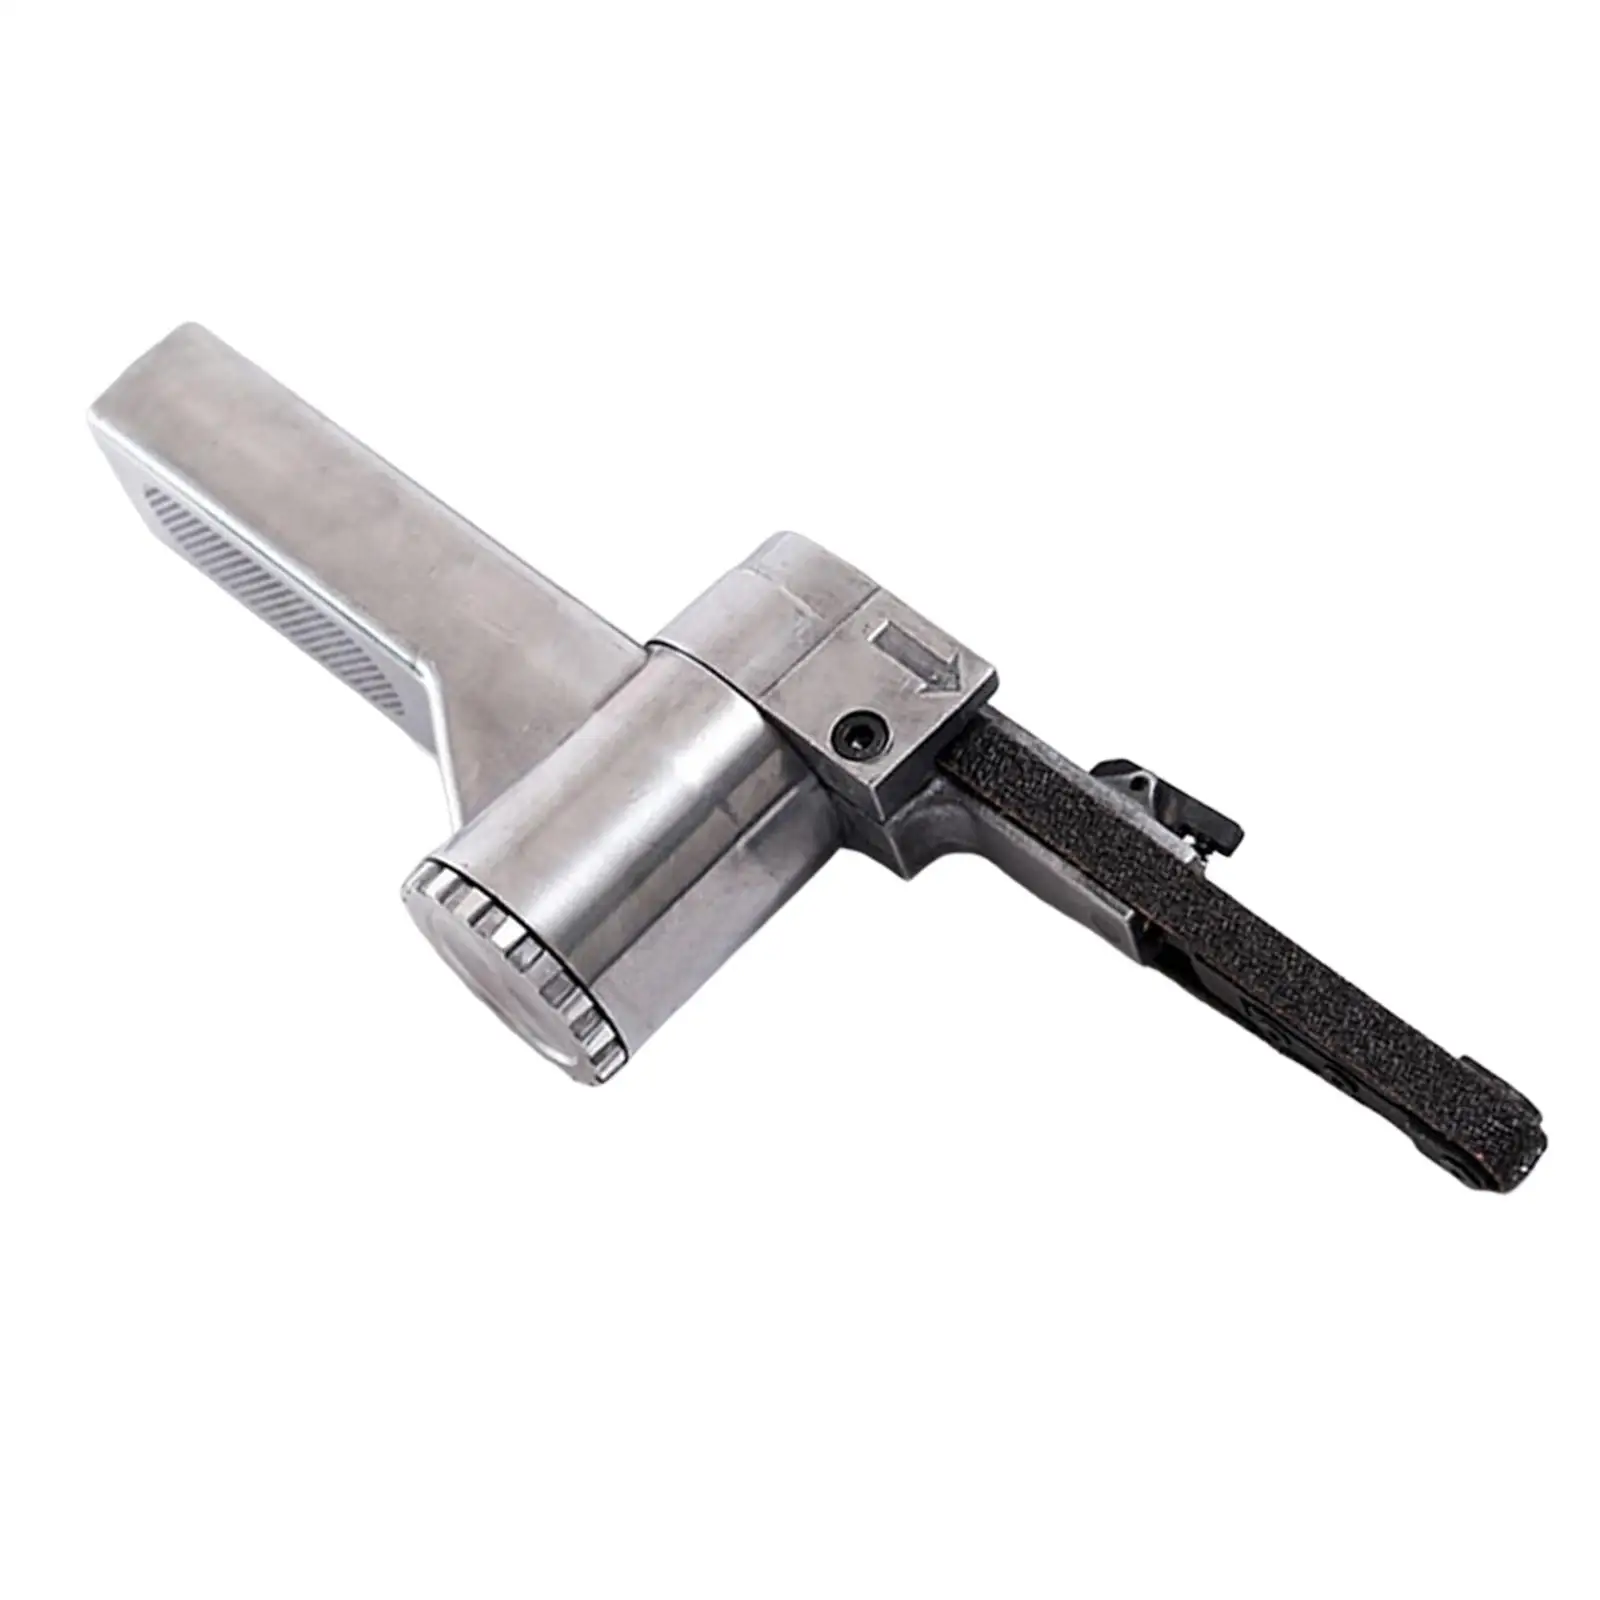 Air Angle Sander Industrial Pneumatic Tool Professional for Iron Polishing Grinding